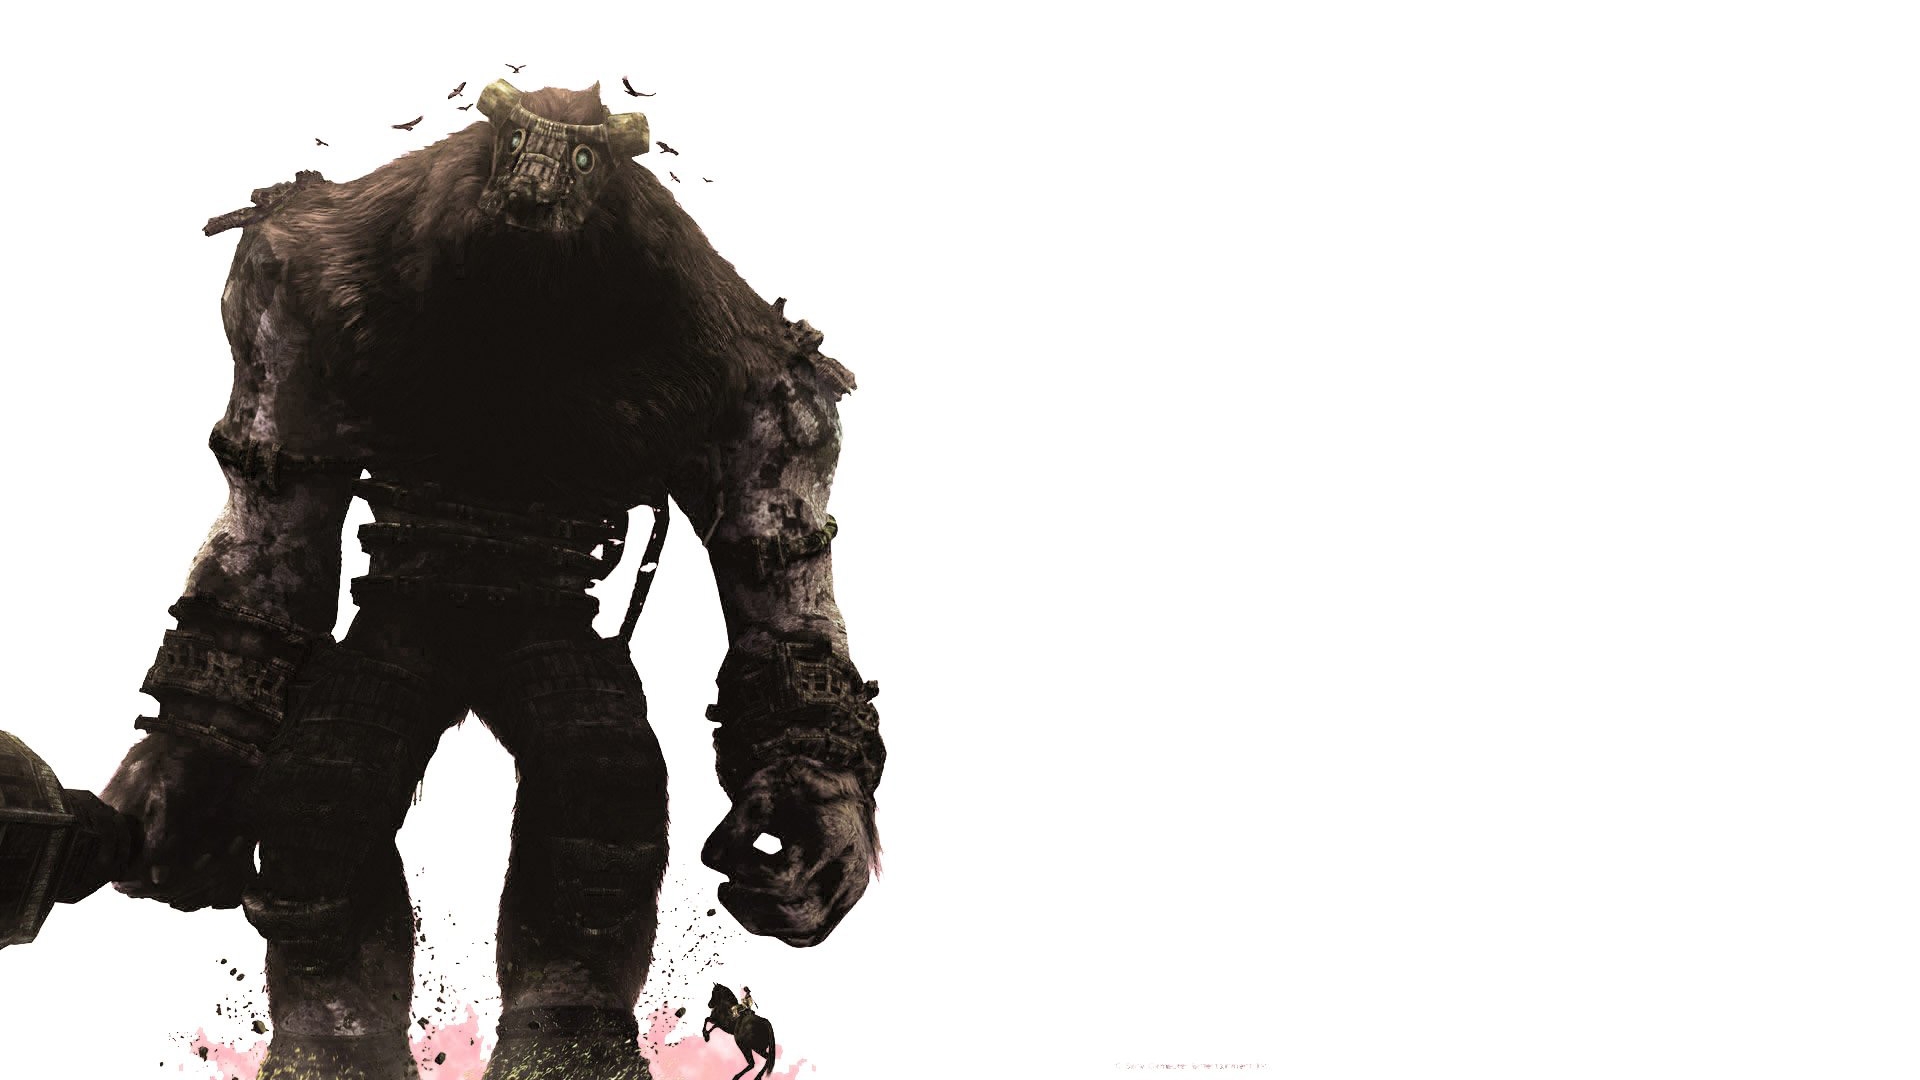 Video Game Shadow Of The Colossus 1920x1080